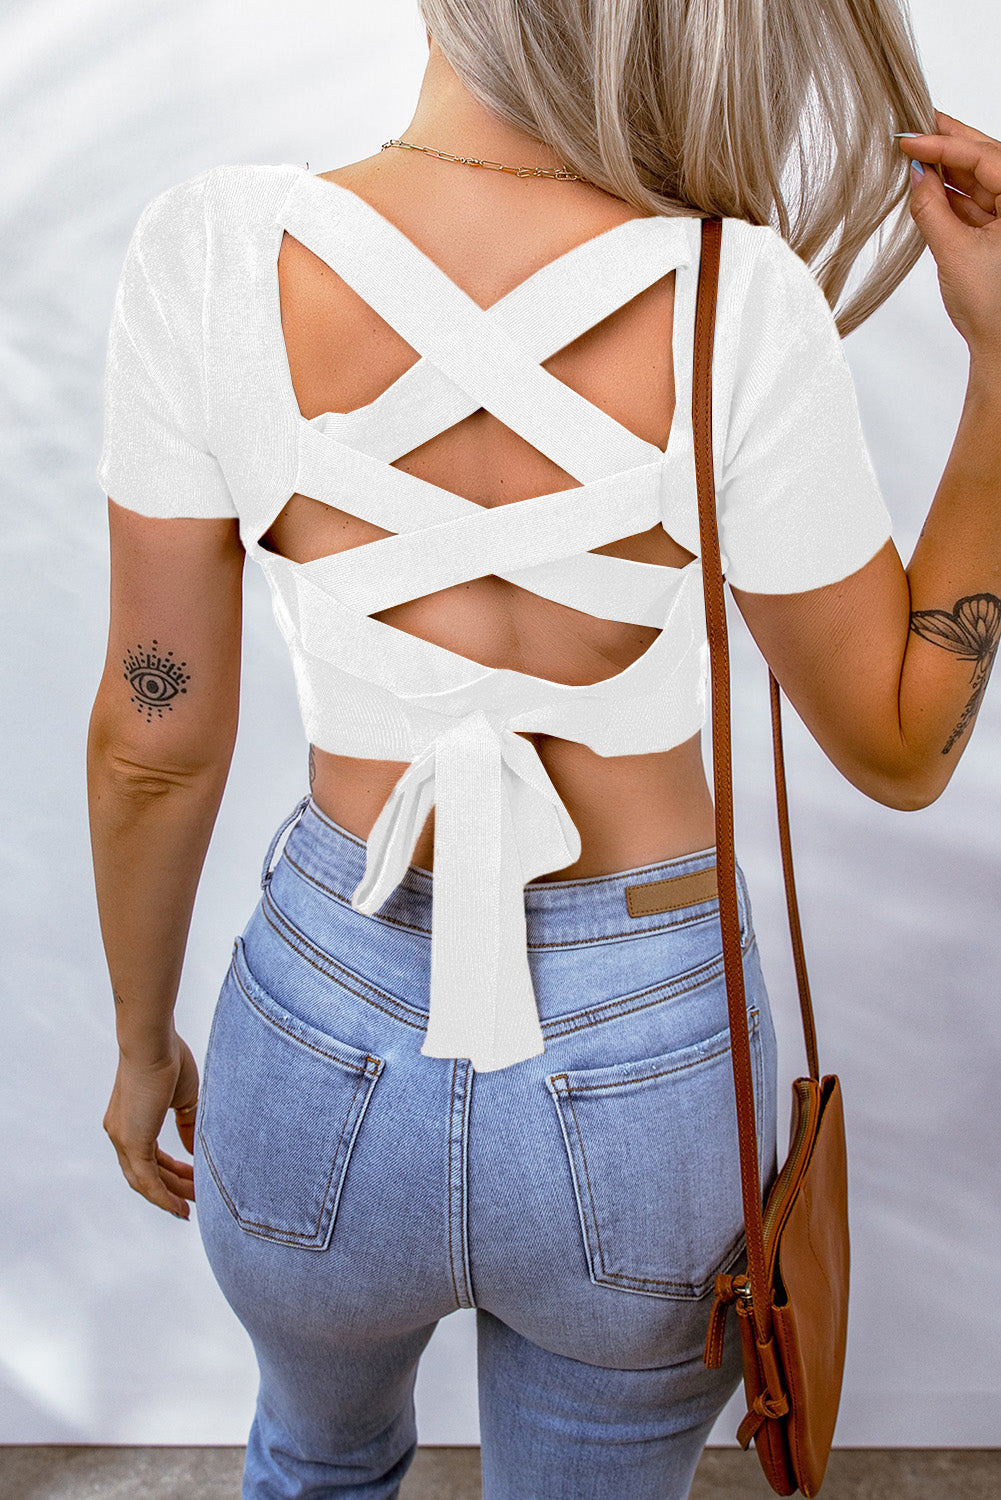 Lace-Up Square Neck Crop Top - Women’s Clothing & Accessories - Shirts & Tops - 14 - 2024